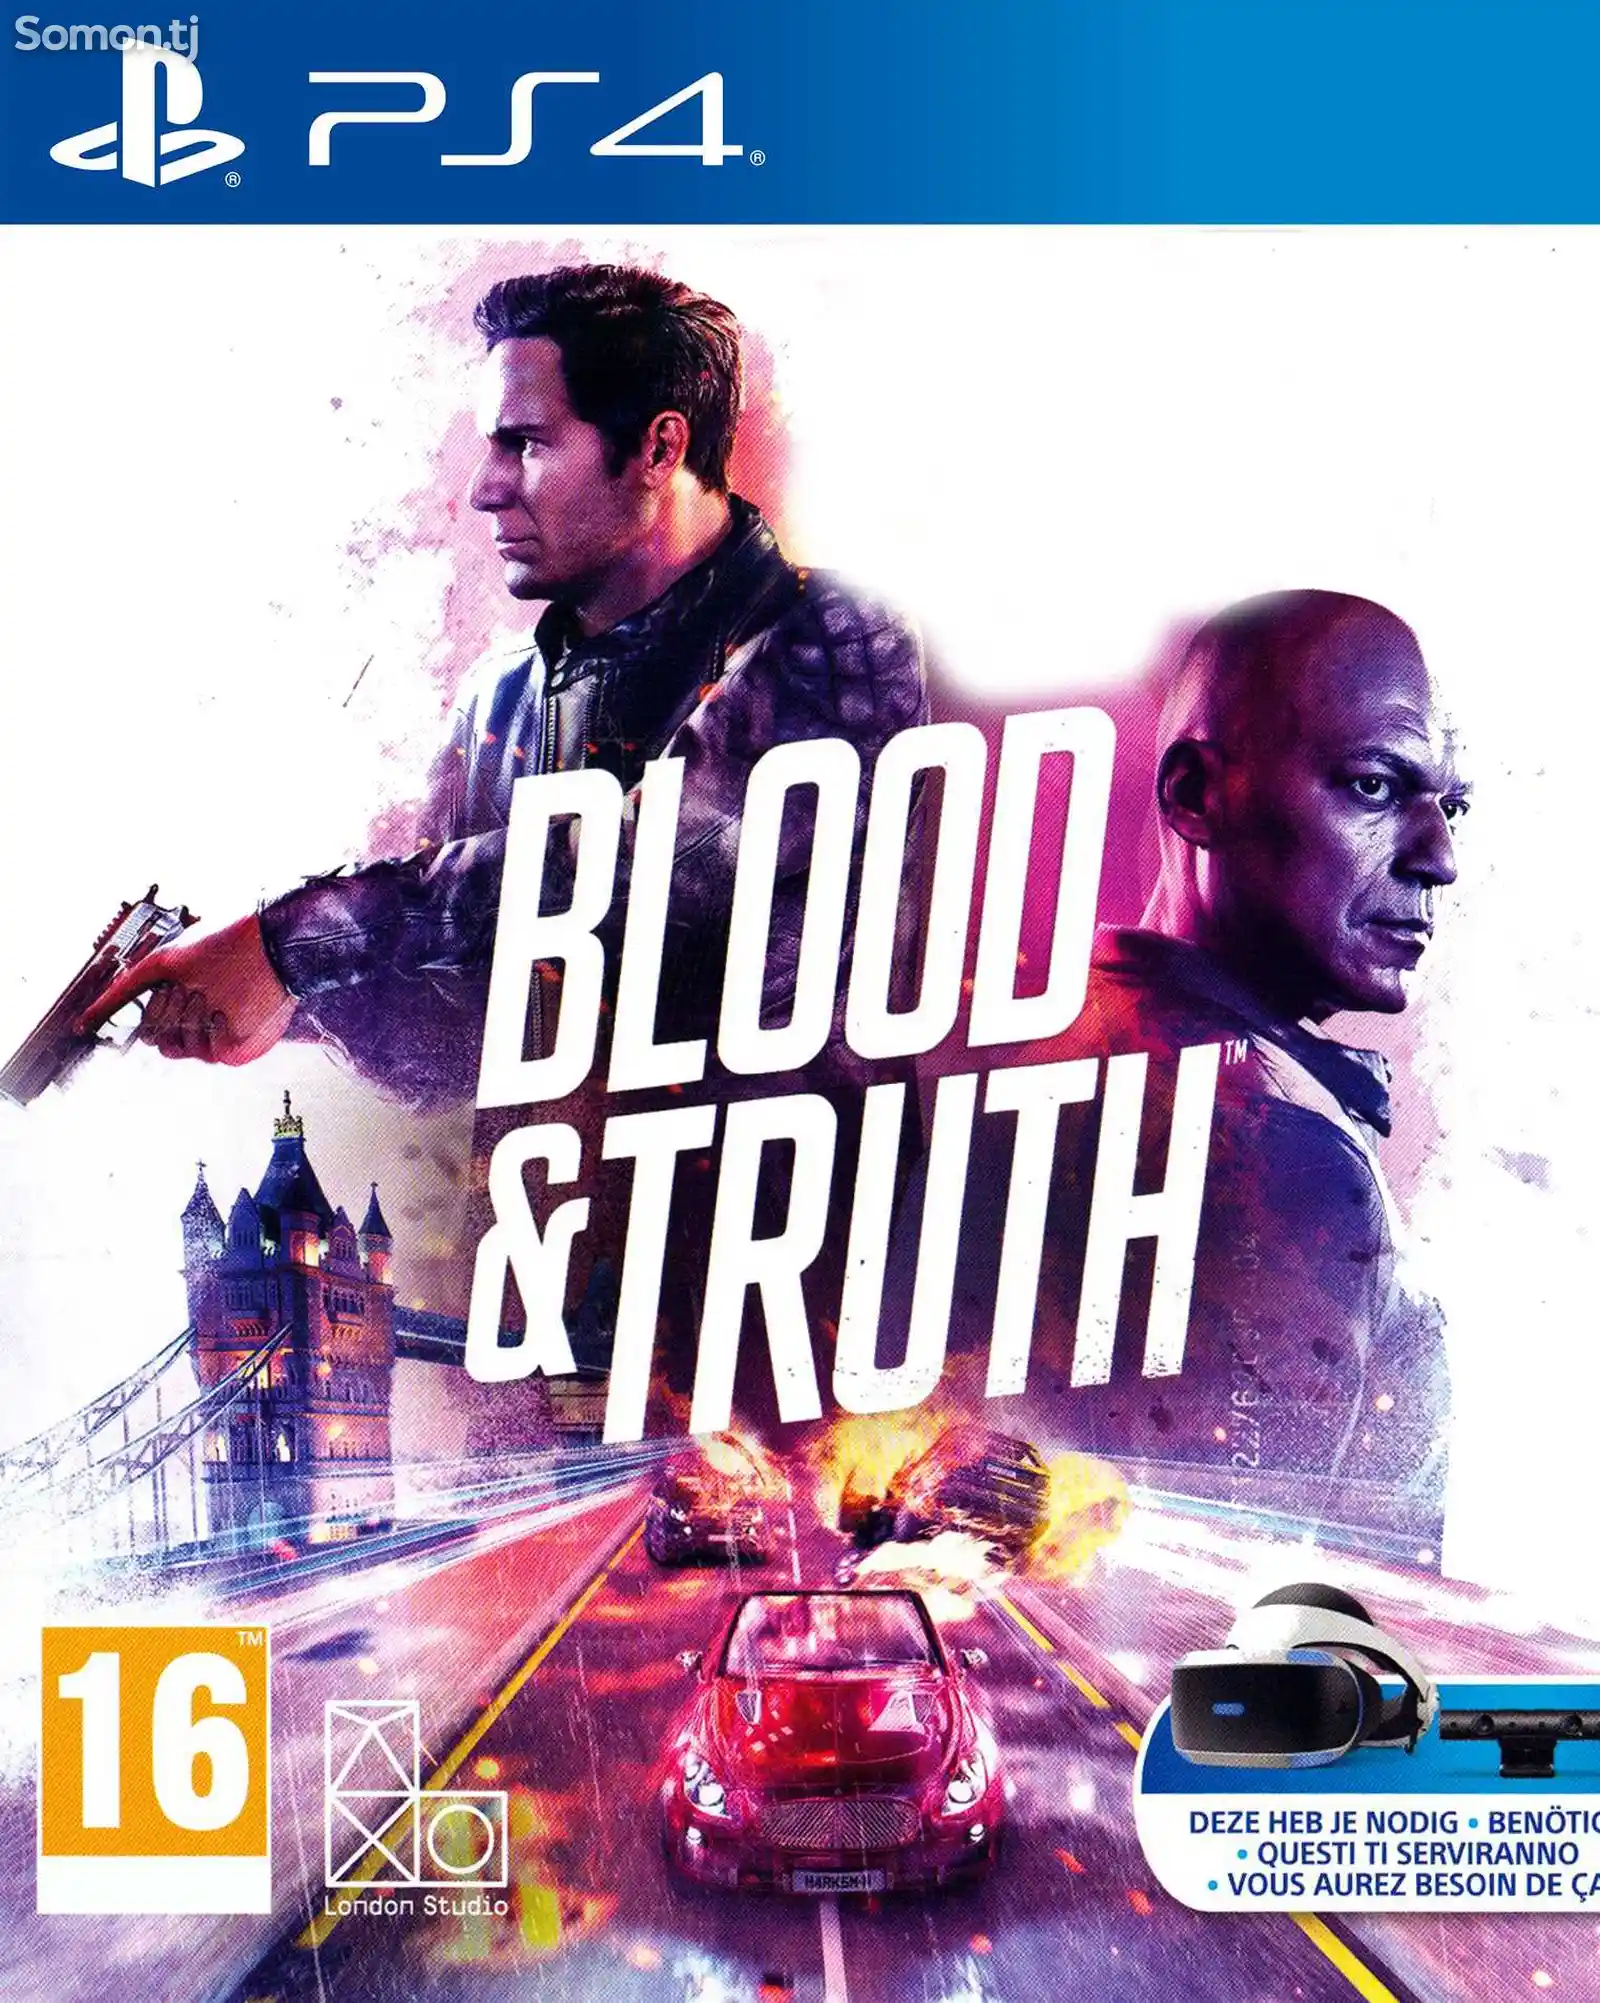 Игра Blood and truth для PS-4 / 5.05 / 6.72 / 7.02 / 7.55 / 9.00-1